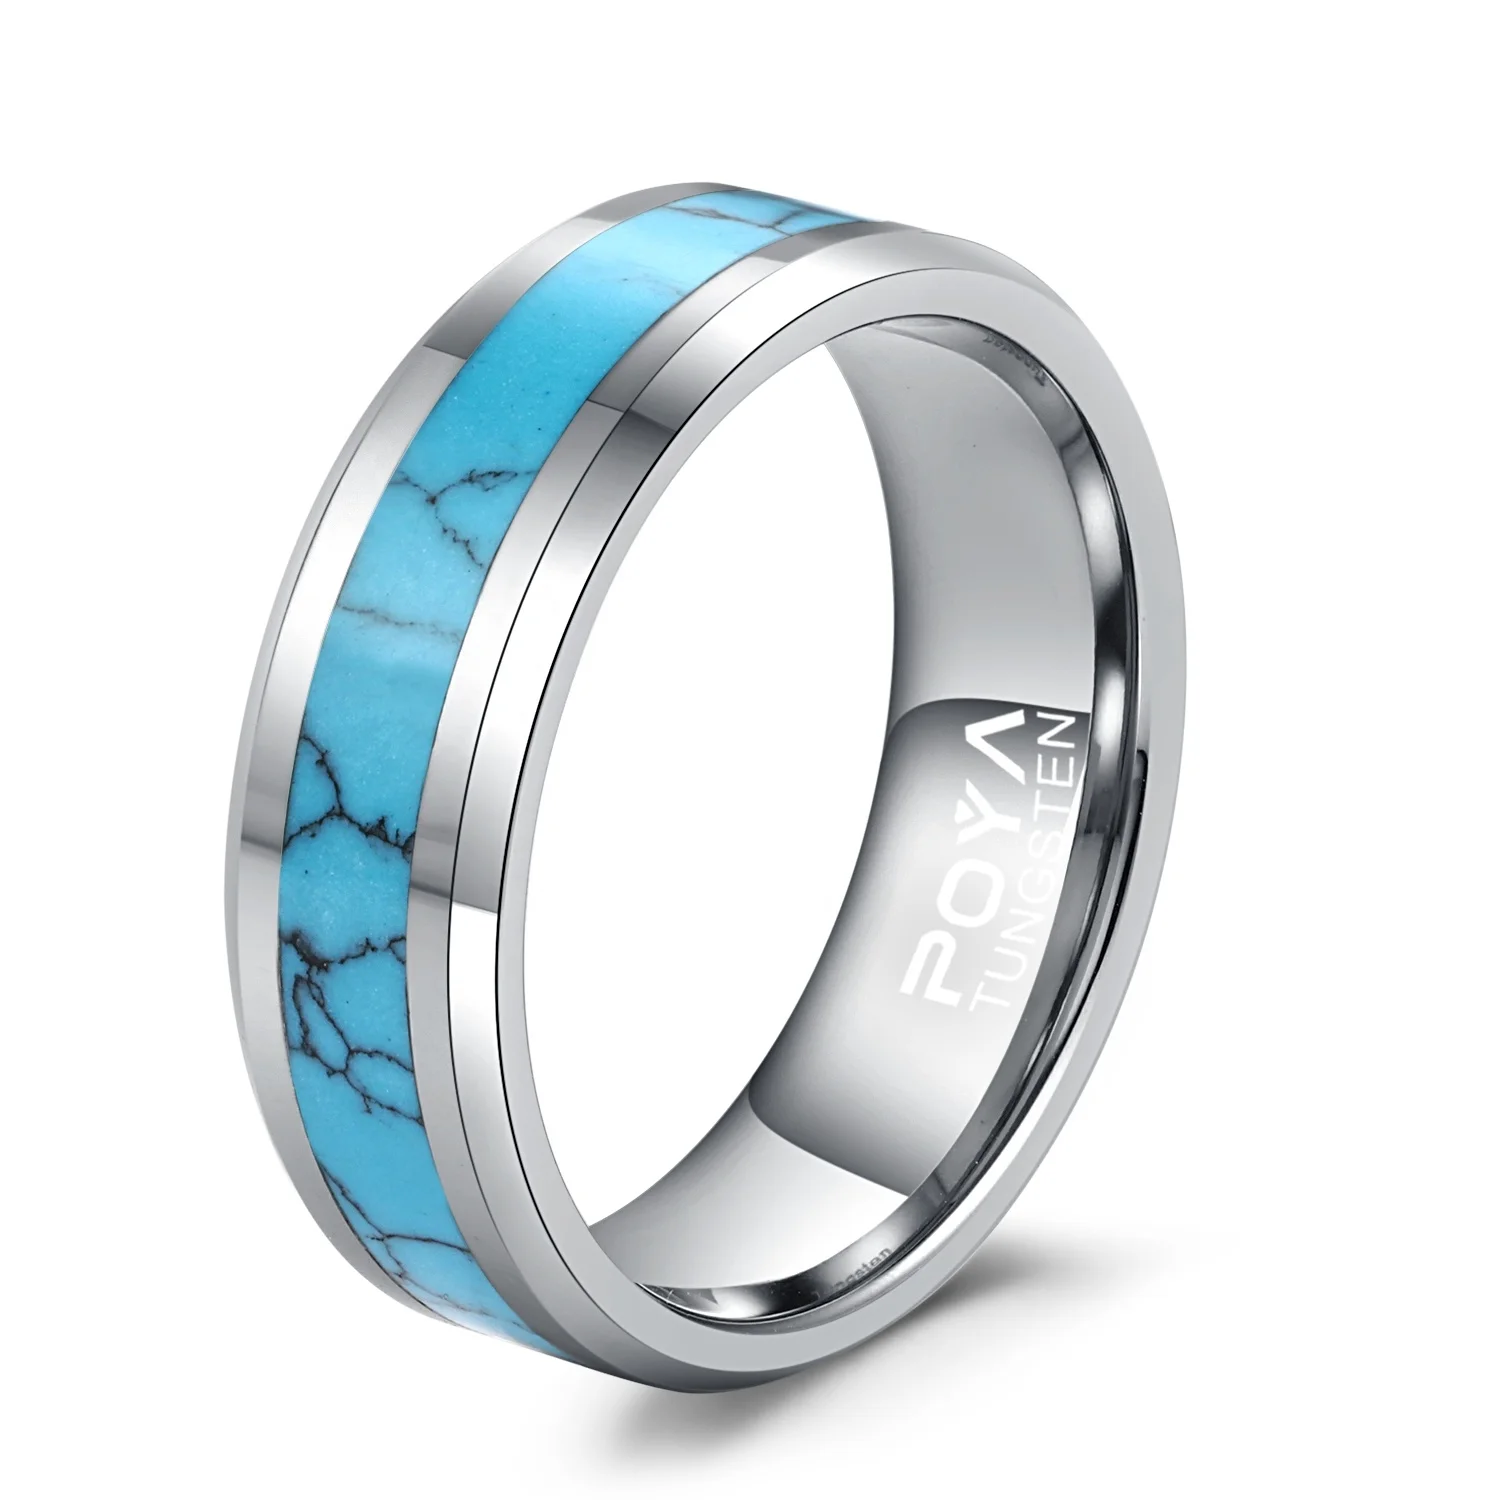 

POYA Jewelry Blank Tungsten Carbide Ring For Men Or Women Turquoise Inlay Wedding Band